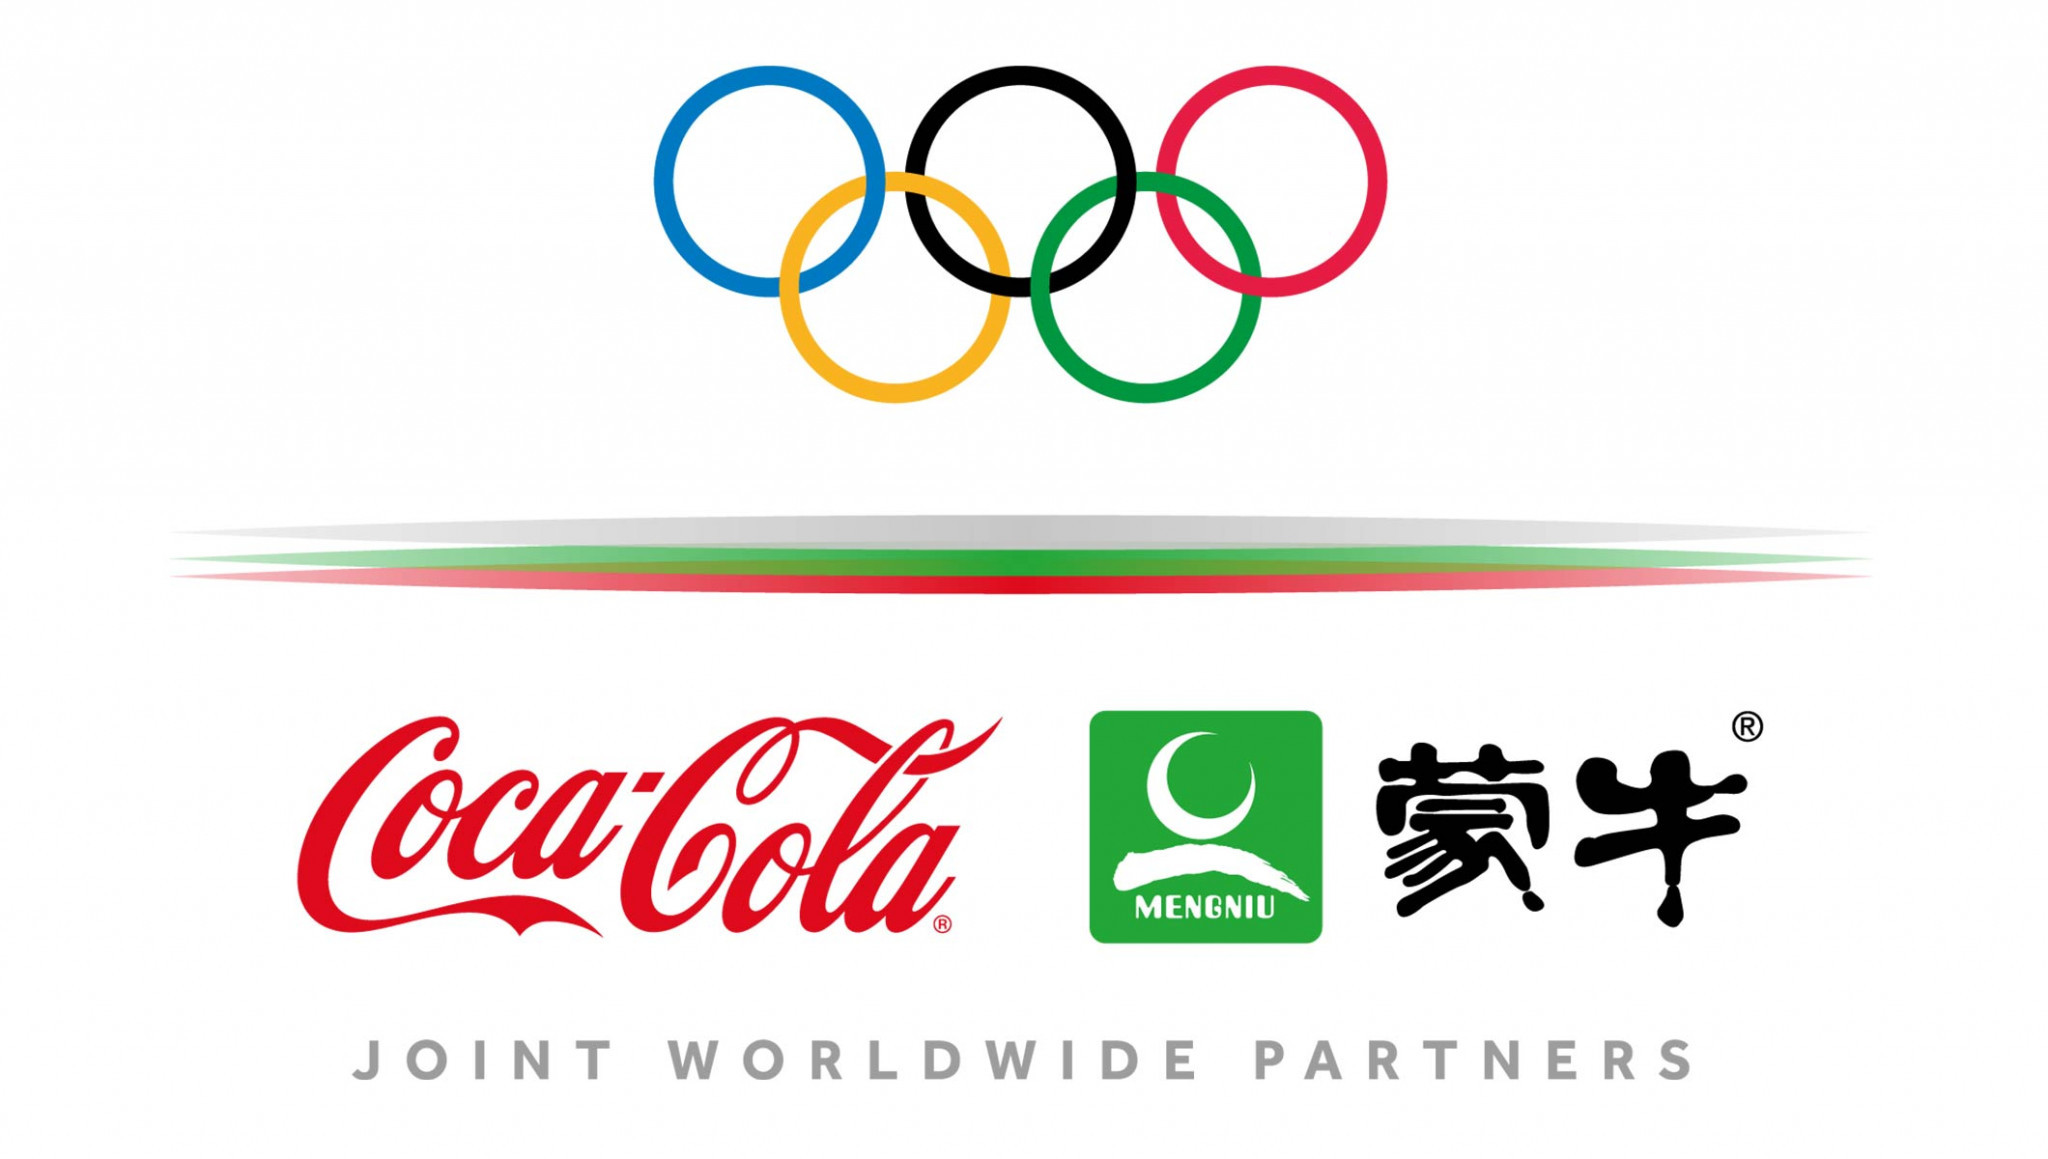 Coca-Cola extends Olympic sponsorship until 2032 in partnership with Chinese dairy producer